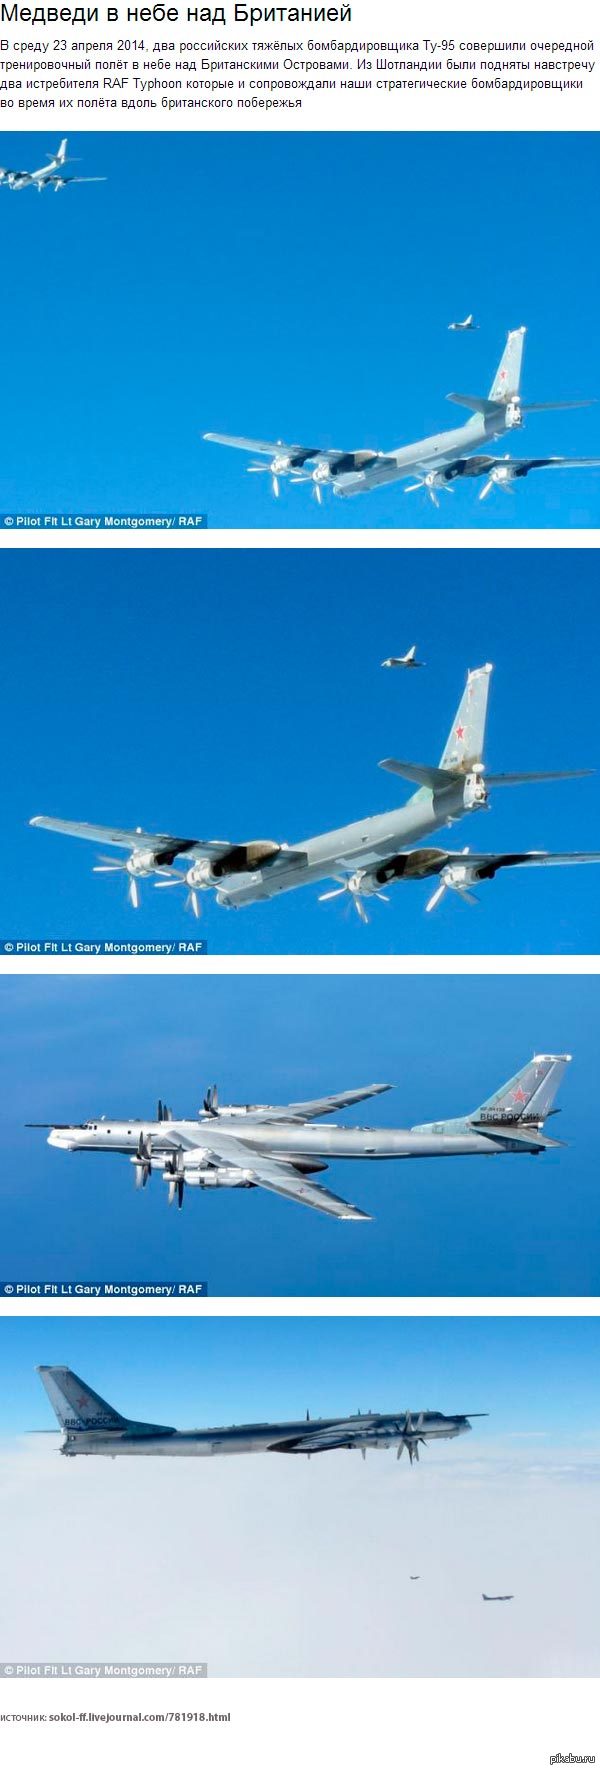 British fighter pilots took photos of our bombers - Russia, Army, Aviation of the Russian Federation, Great Britain, Bomber, Aviation